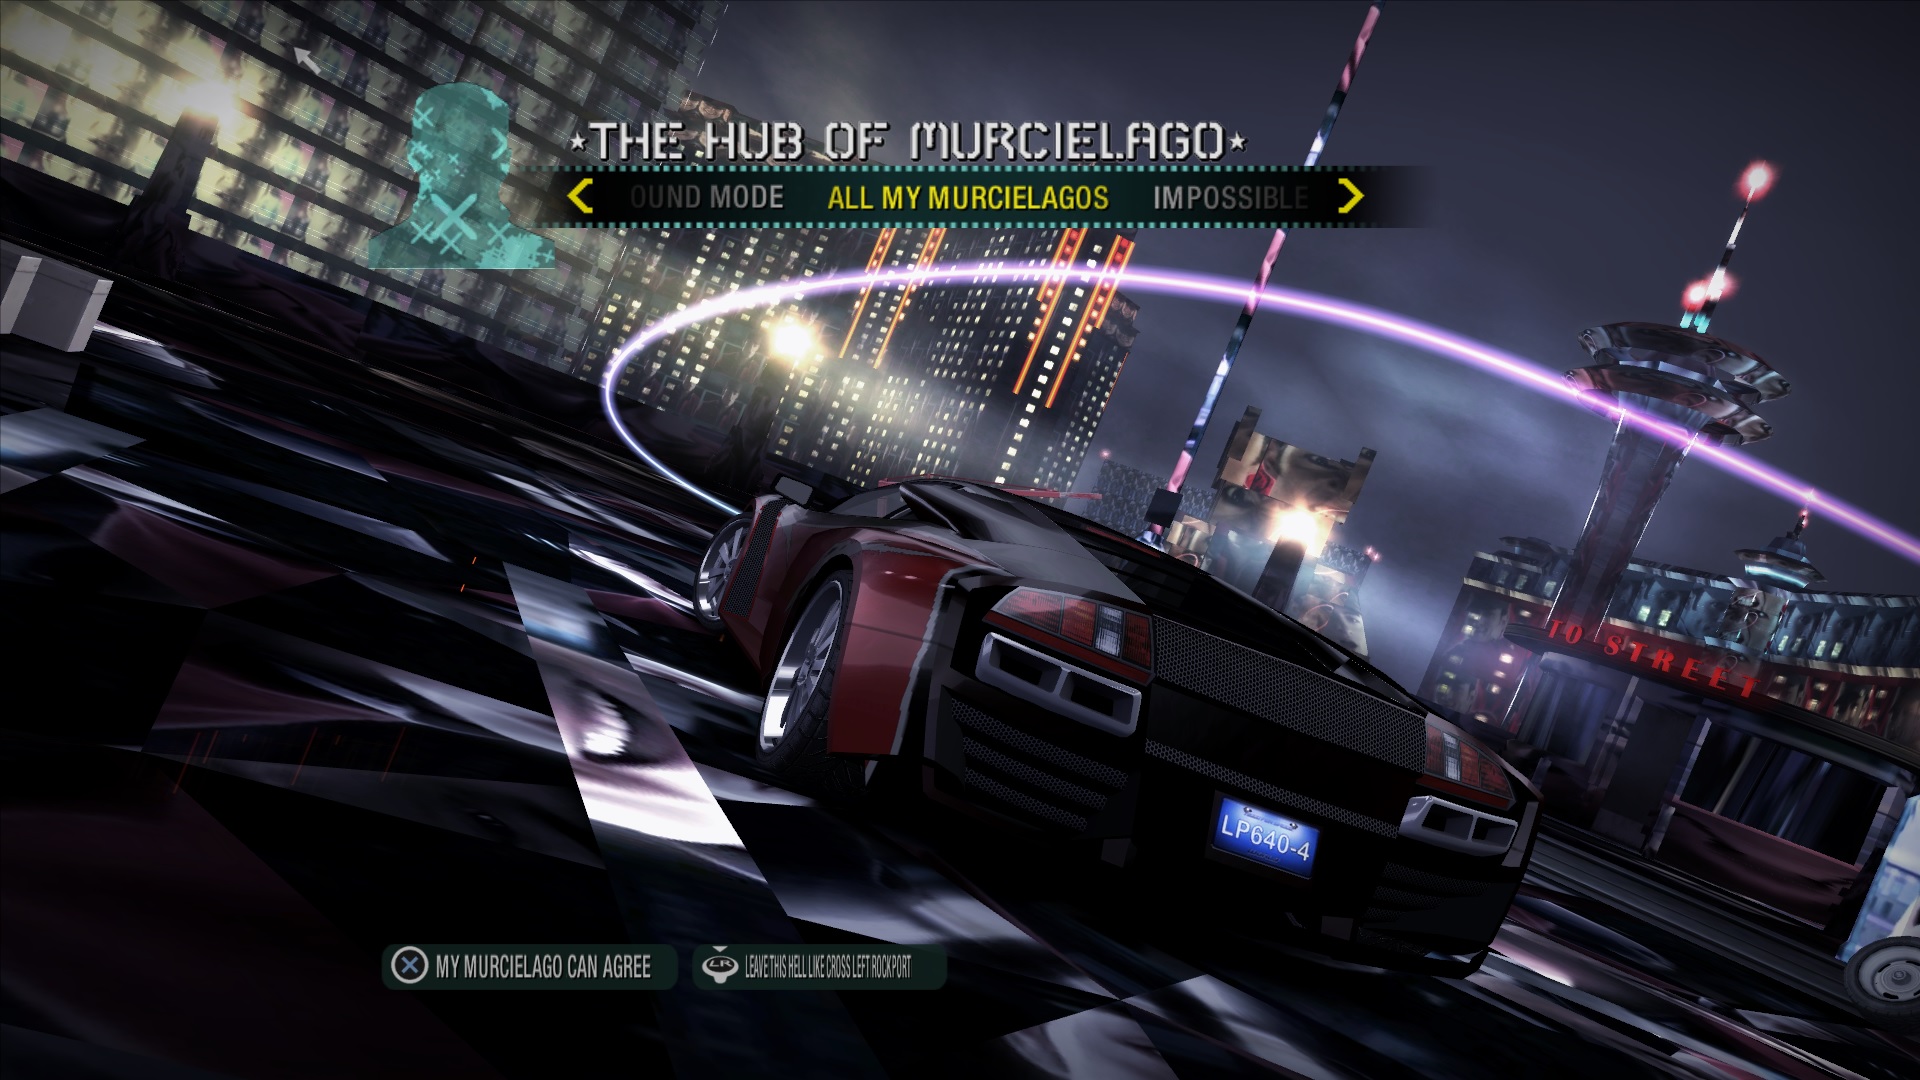 need for speed carbon zip file